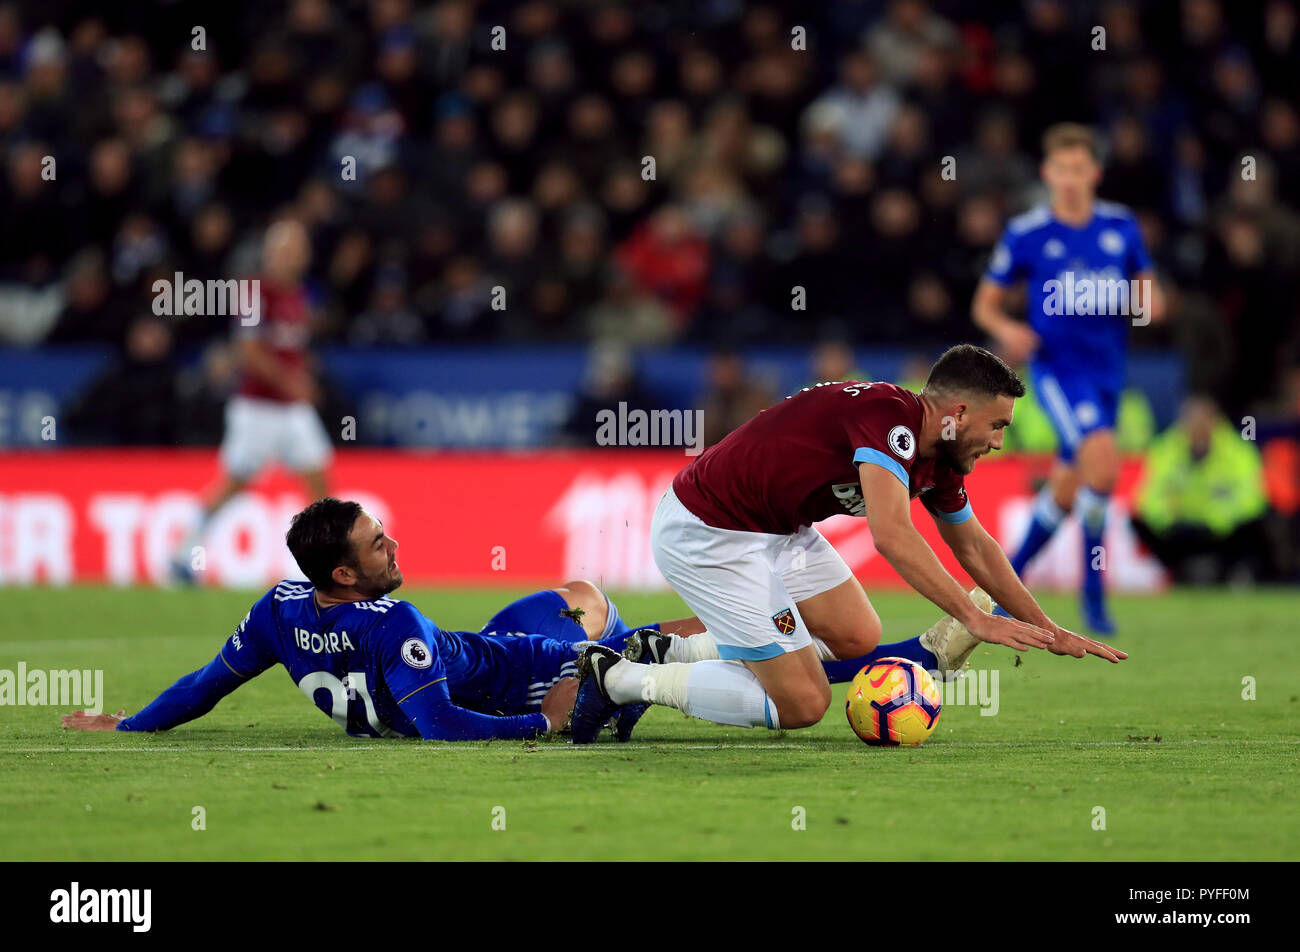 Leicester City's Vicente Iborra (left) and West Ham United's Robert Snodgrass battle for the ball during the Premier League match at The King Power Stadium, Leicester. Stock Photo